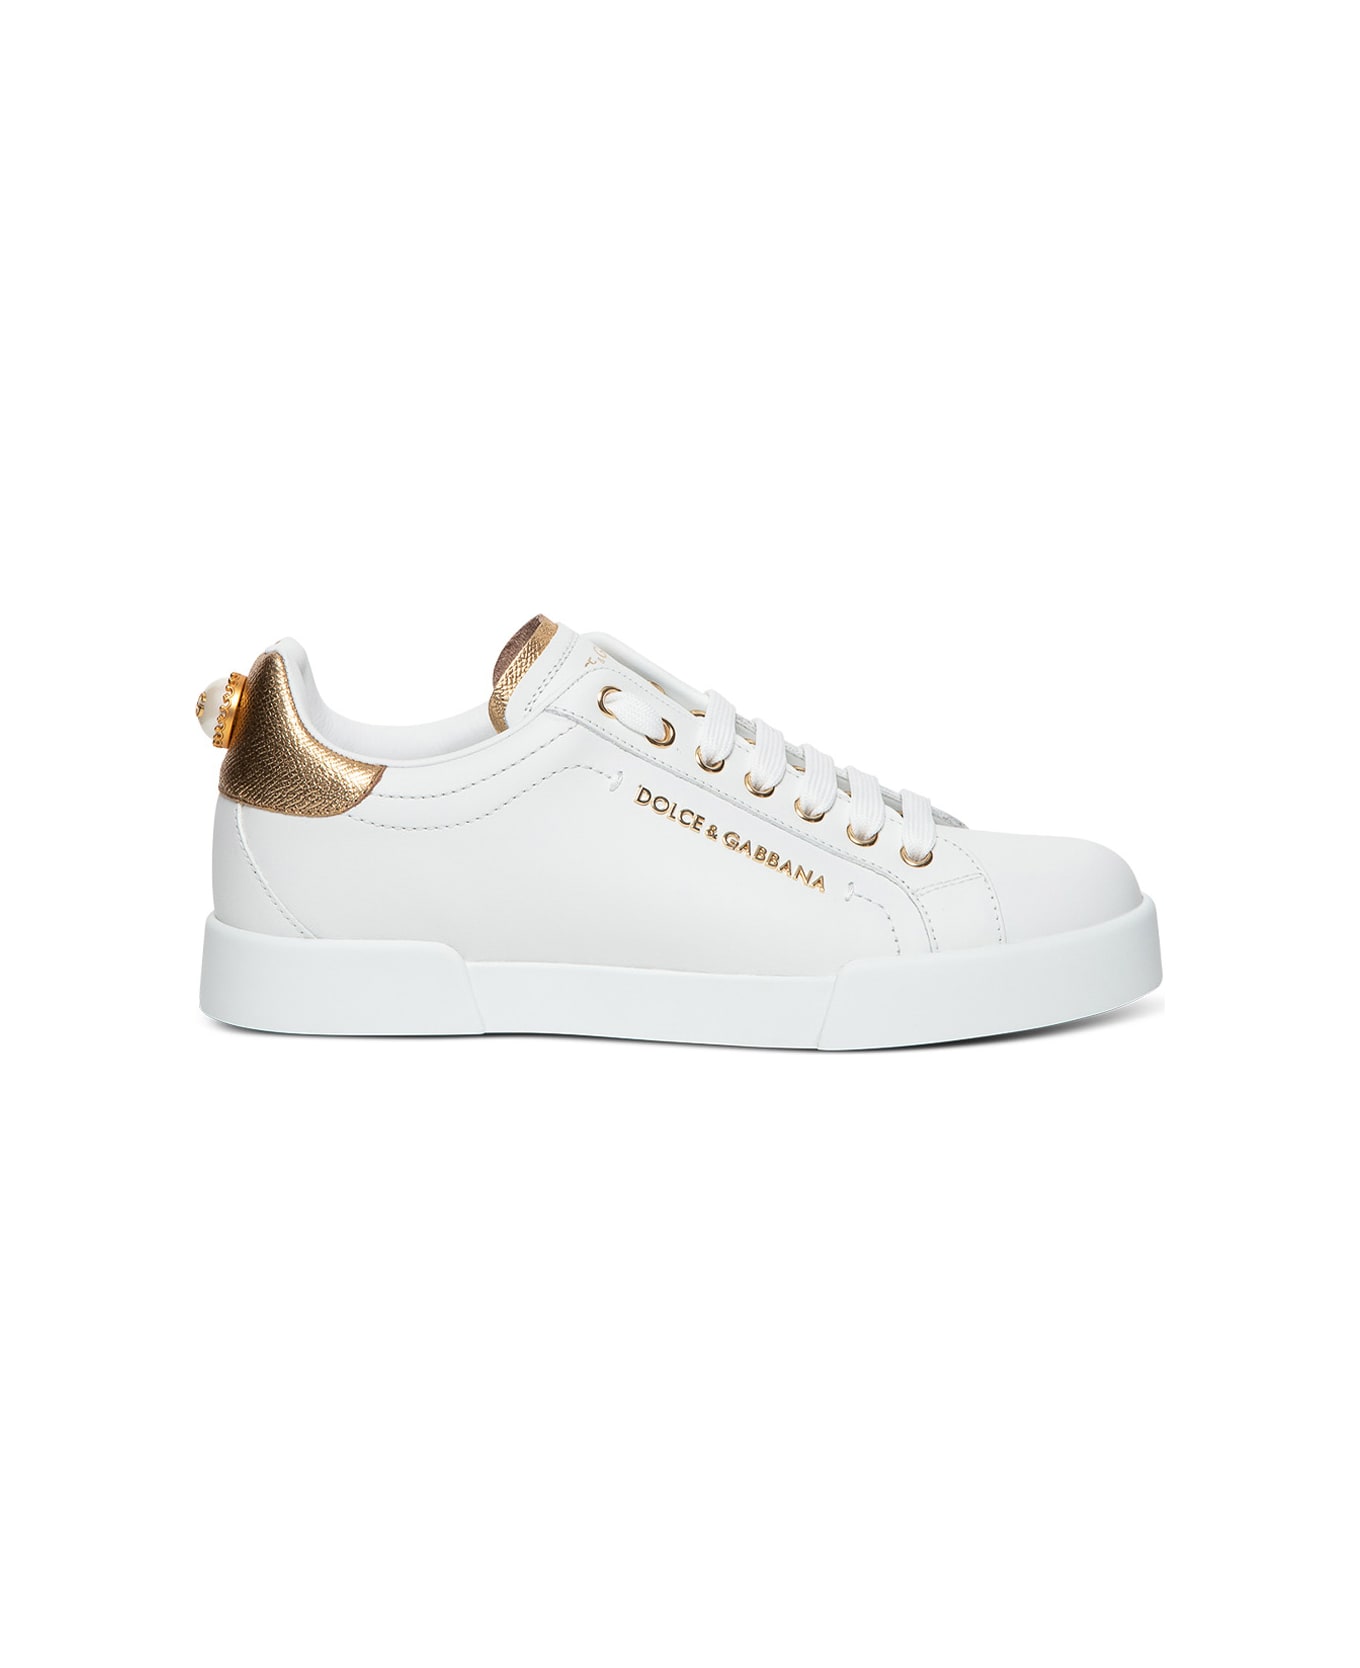 Dolce & Gabbana Leather Sneakers With Gold Colored Details - White